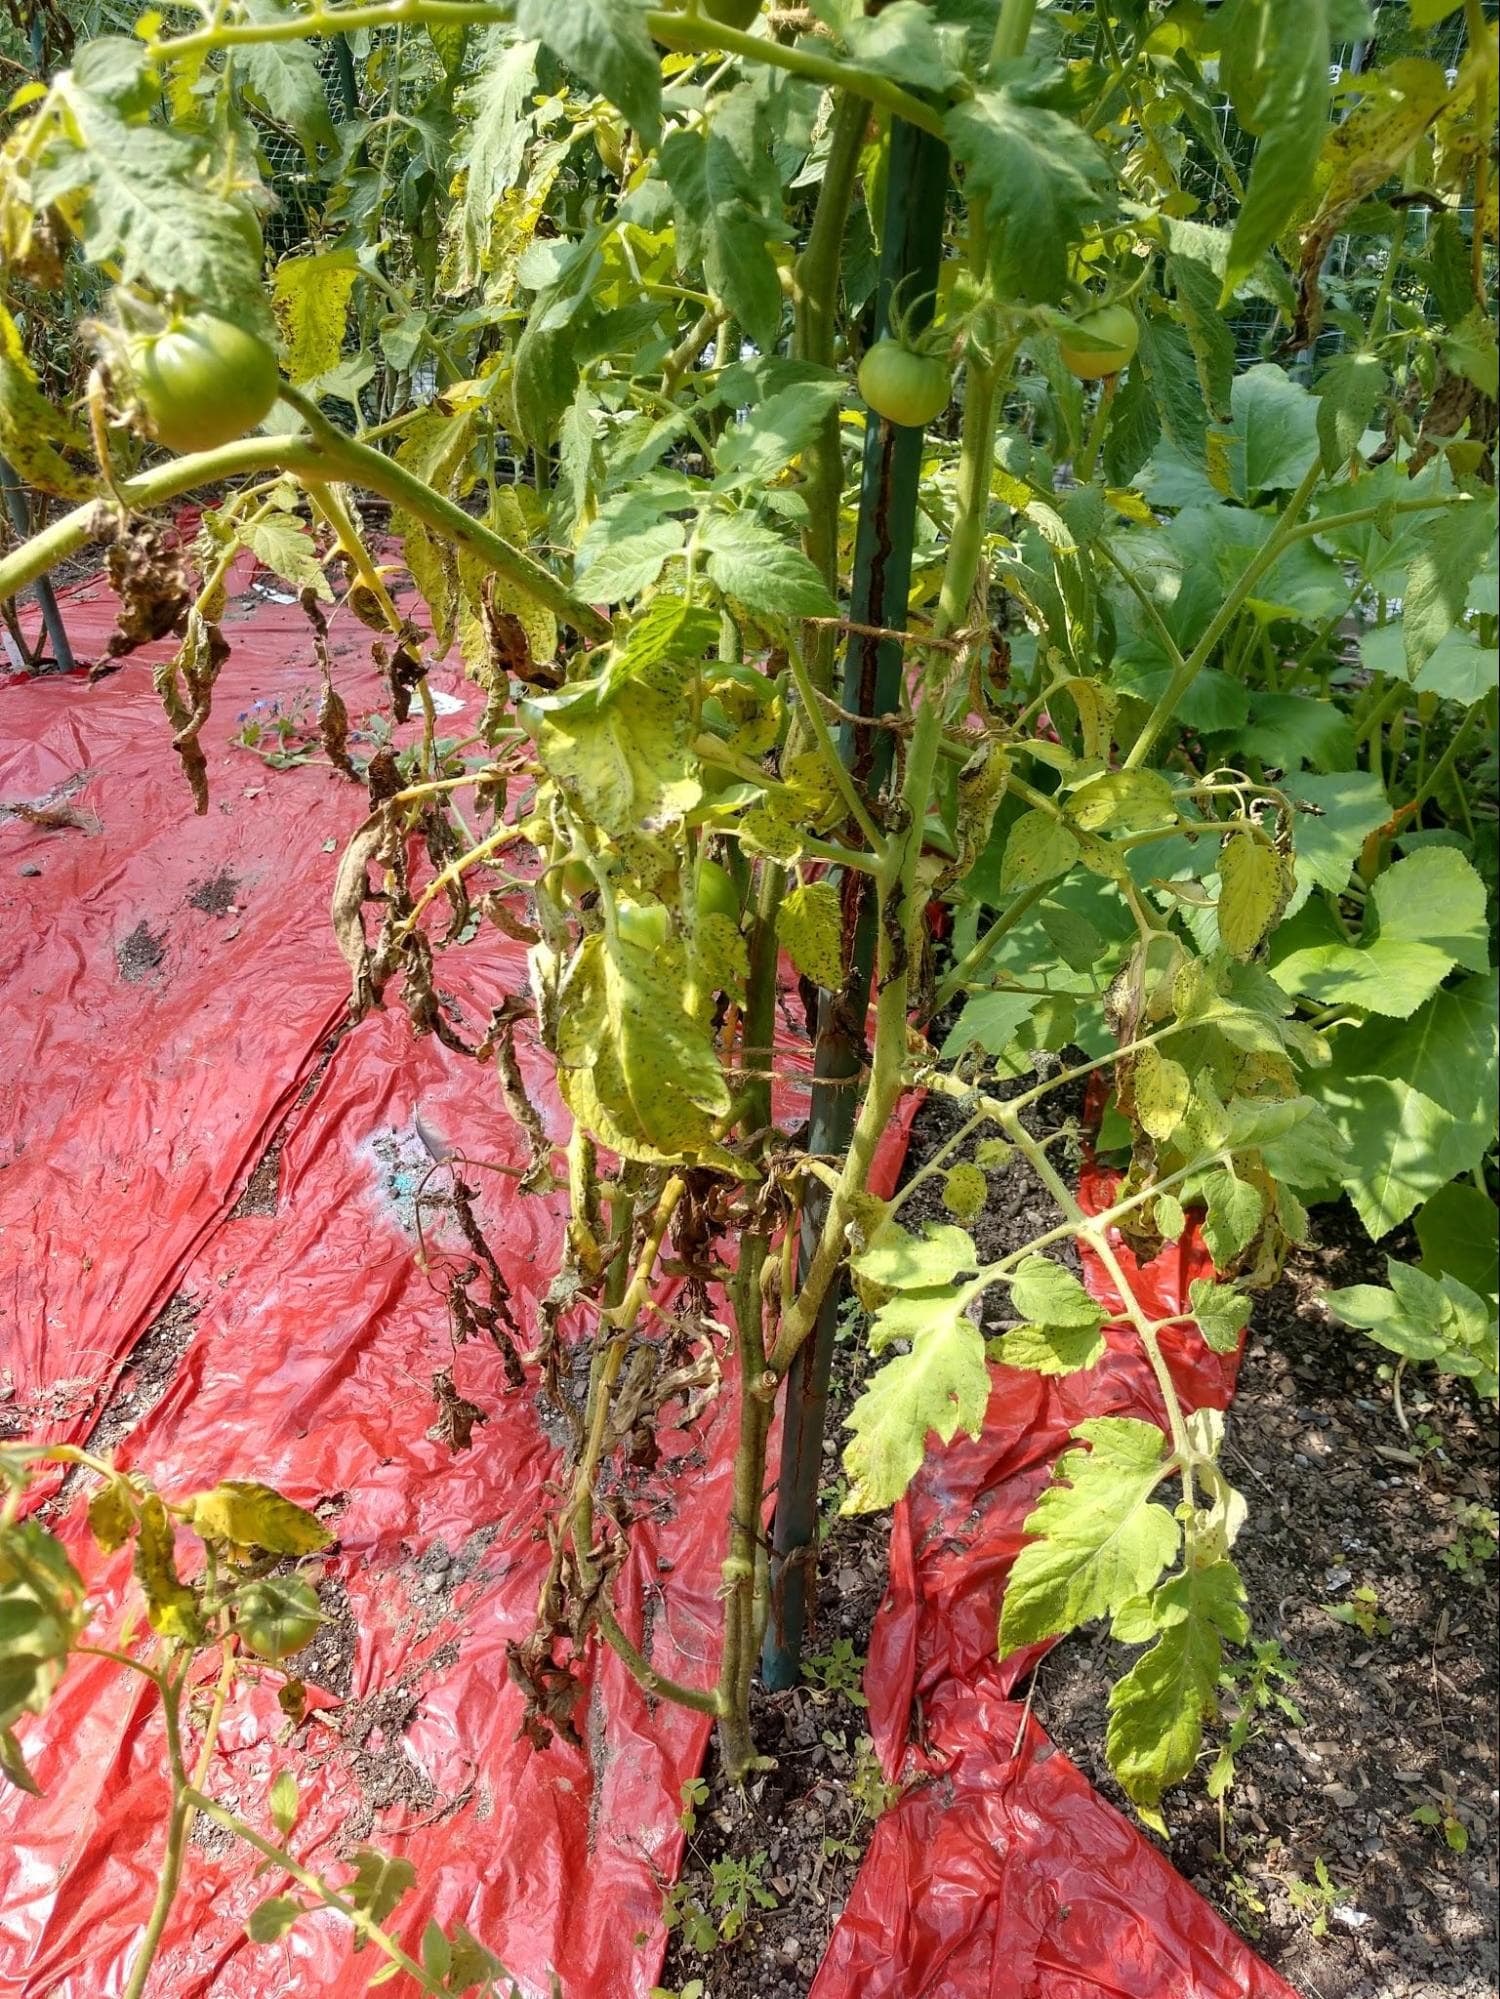 Blight on tomatoes shows up as dying leaves from the bottom up. (Dave Epstein)